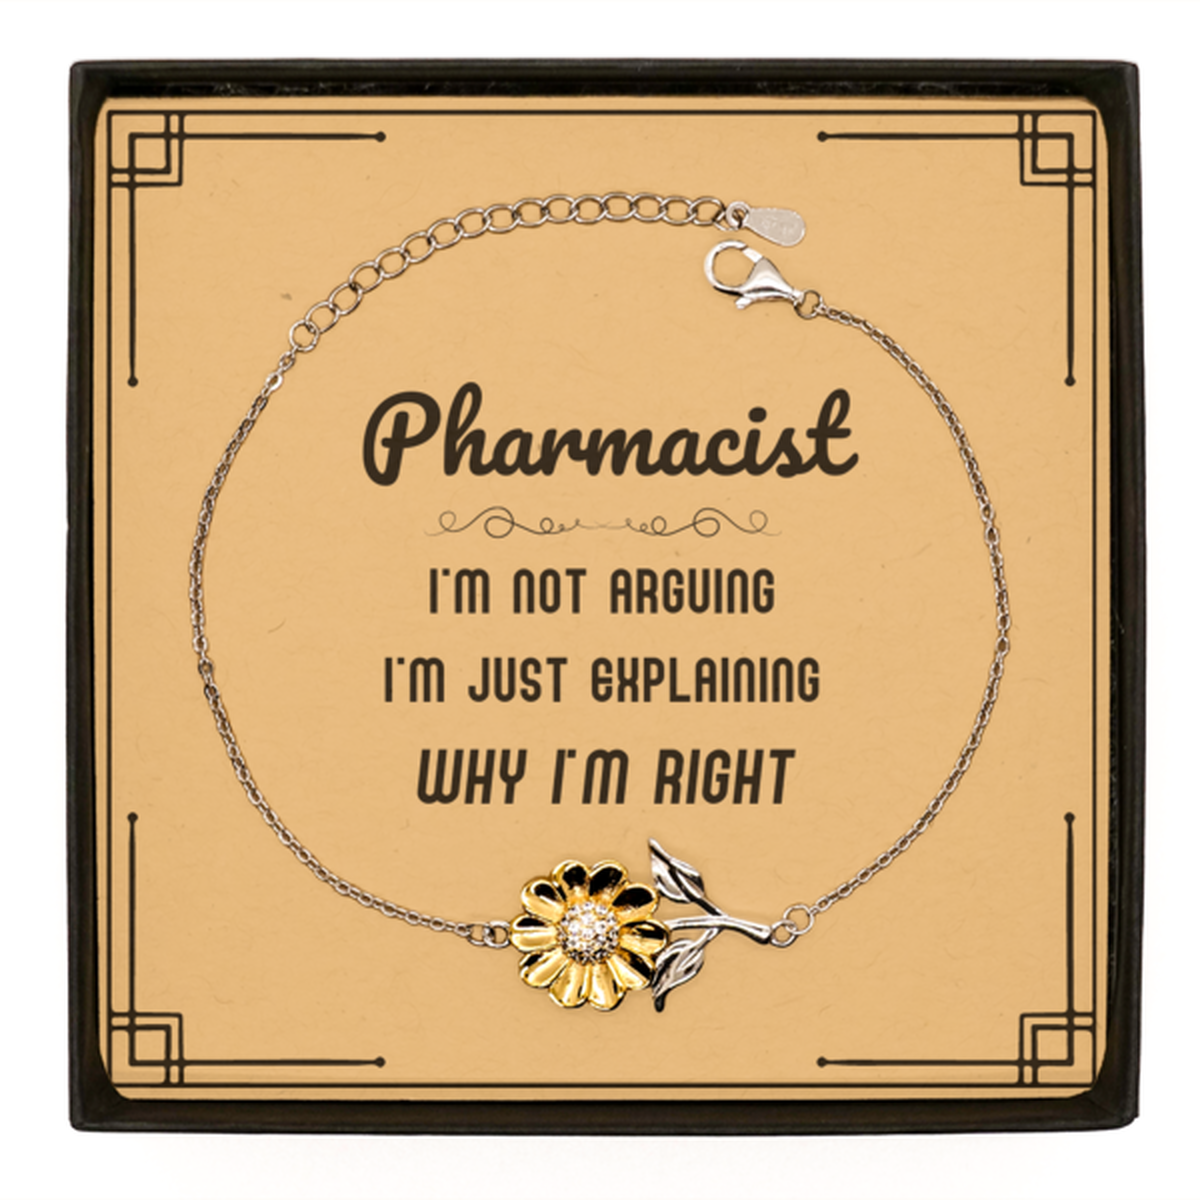 Pharmacist I'm not Arguing. I'm Just Explaining Why I'm RIGHT Sunflower Bracelet, Funny Saying Quote Pharmacist Gifts For Pharmacist Message Card Graduation Birthday Christmas Gifts for Men Women Coworker